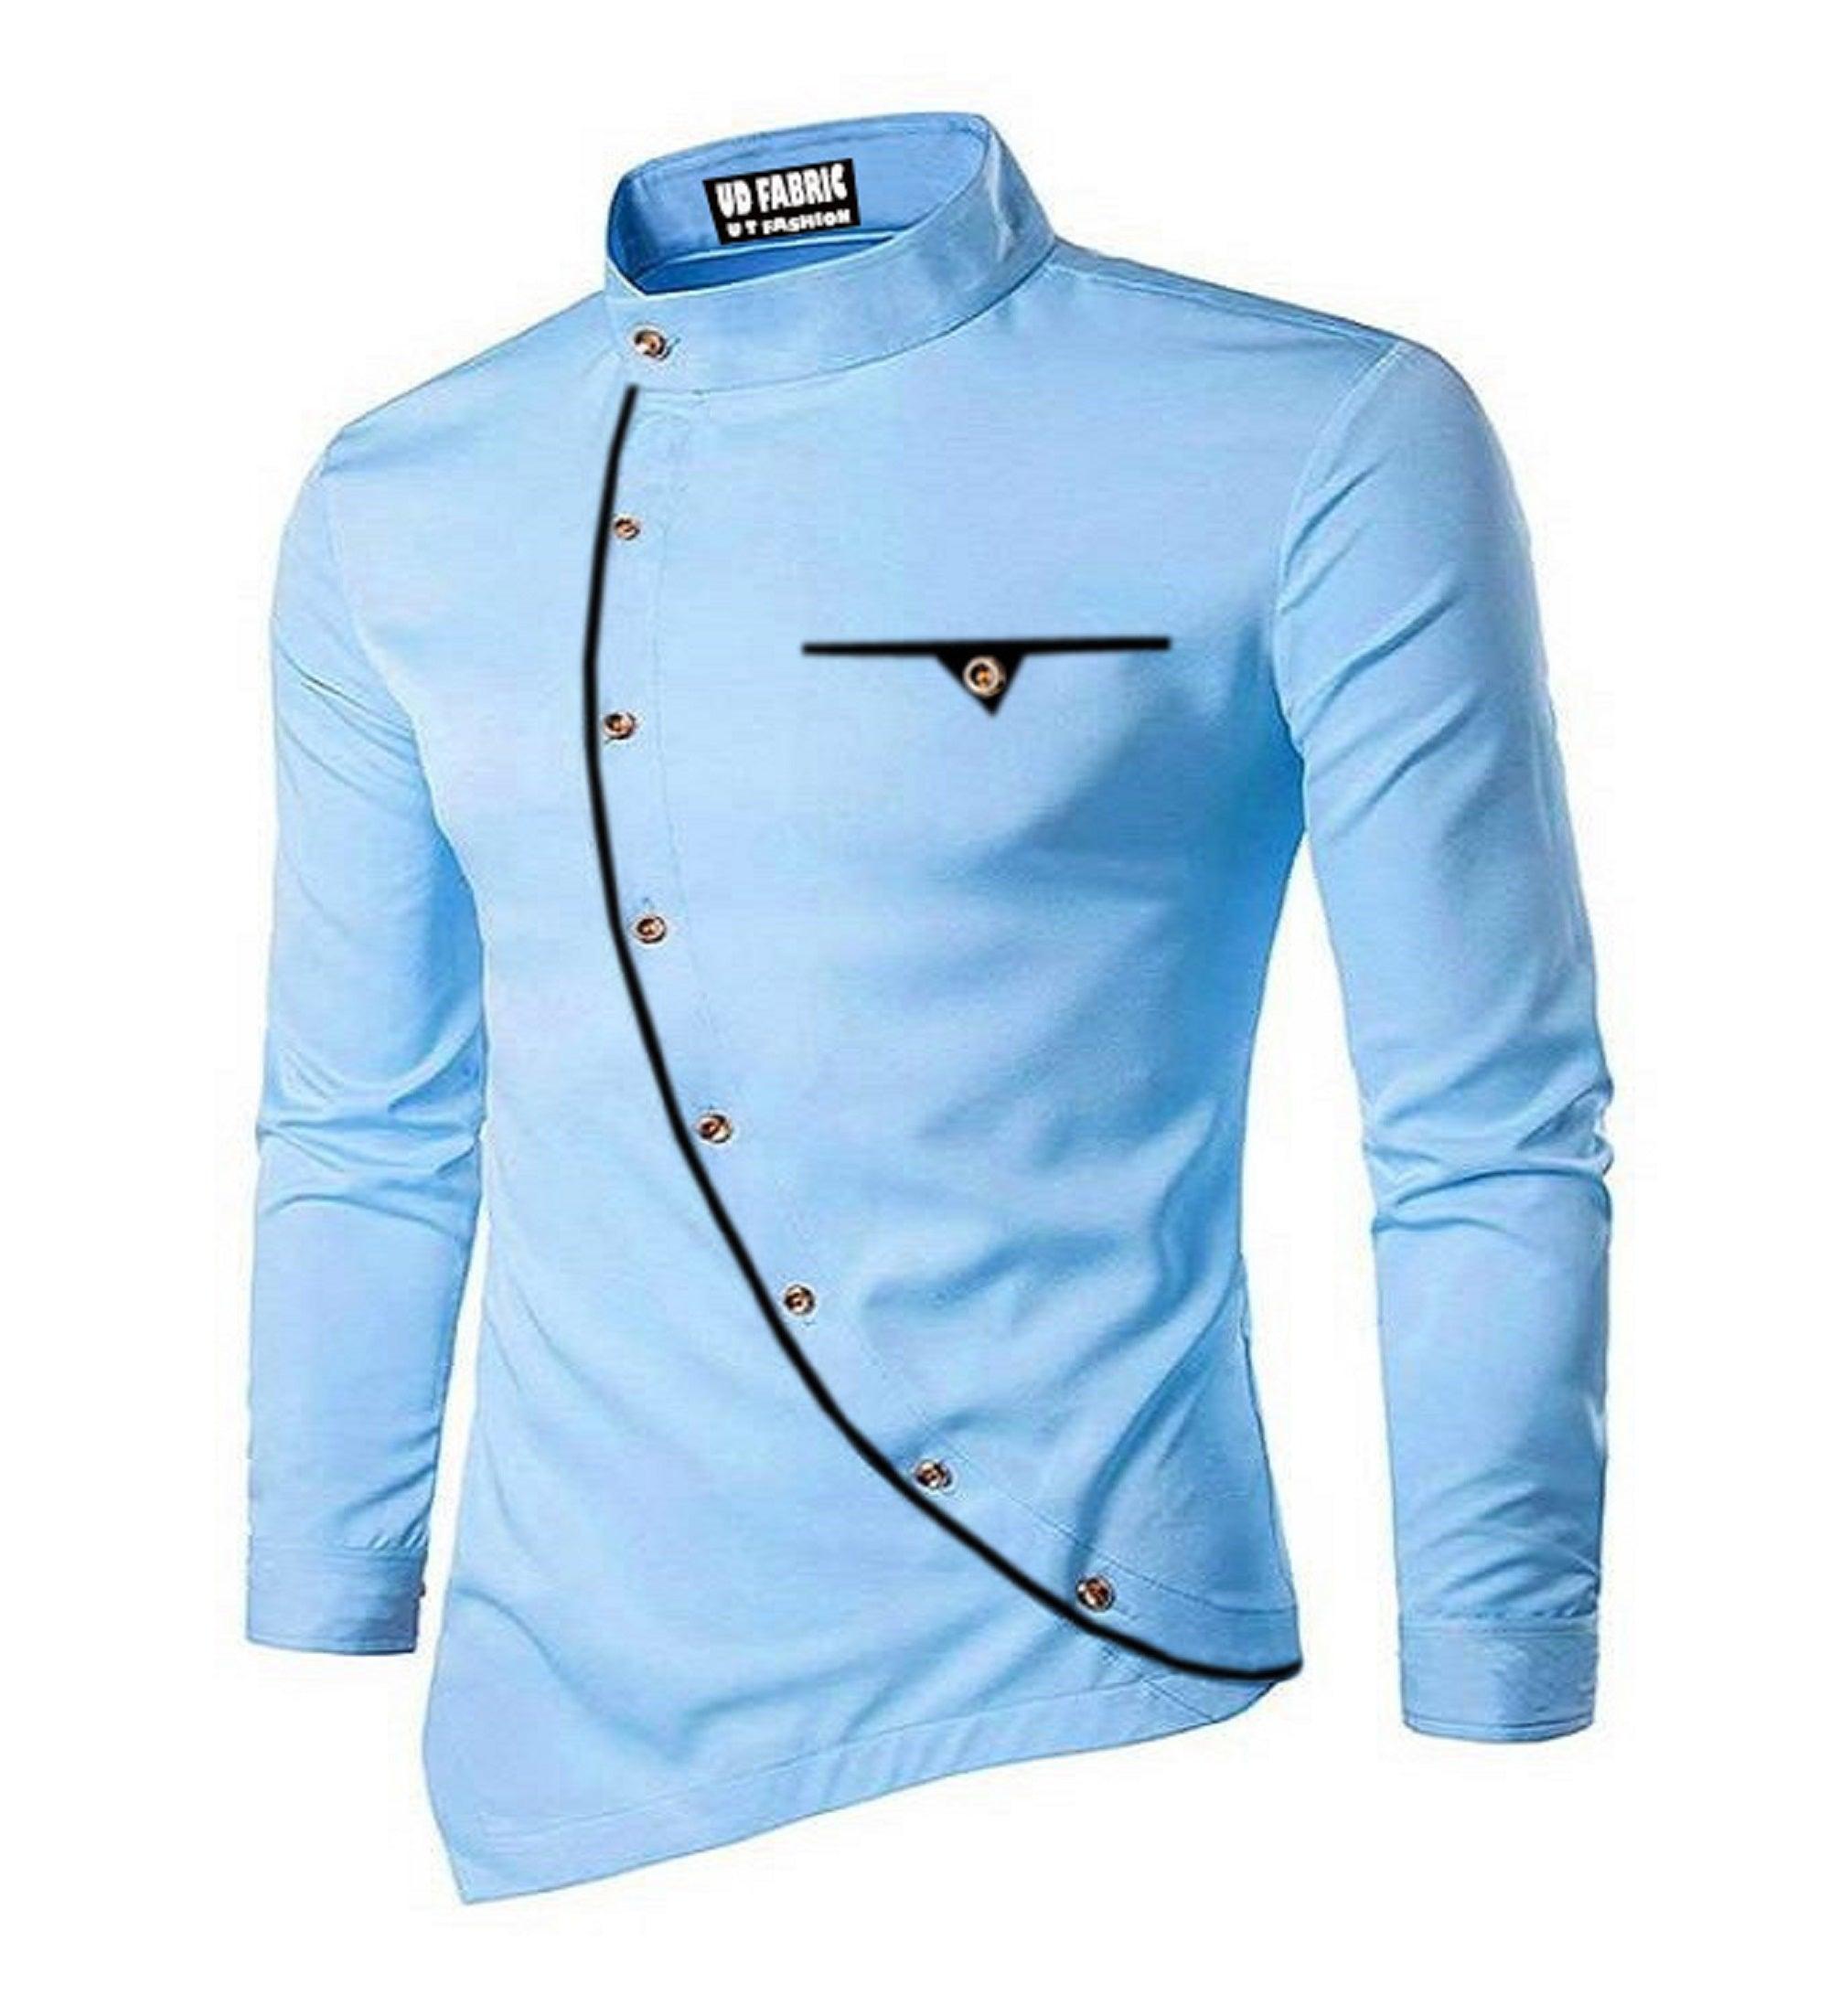 UDFABRIC Men’s Cotton Curve Full Sleeve Slim Fit Kurta -Skyblue - UD FABRIC - Your Style our Design